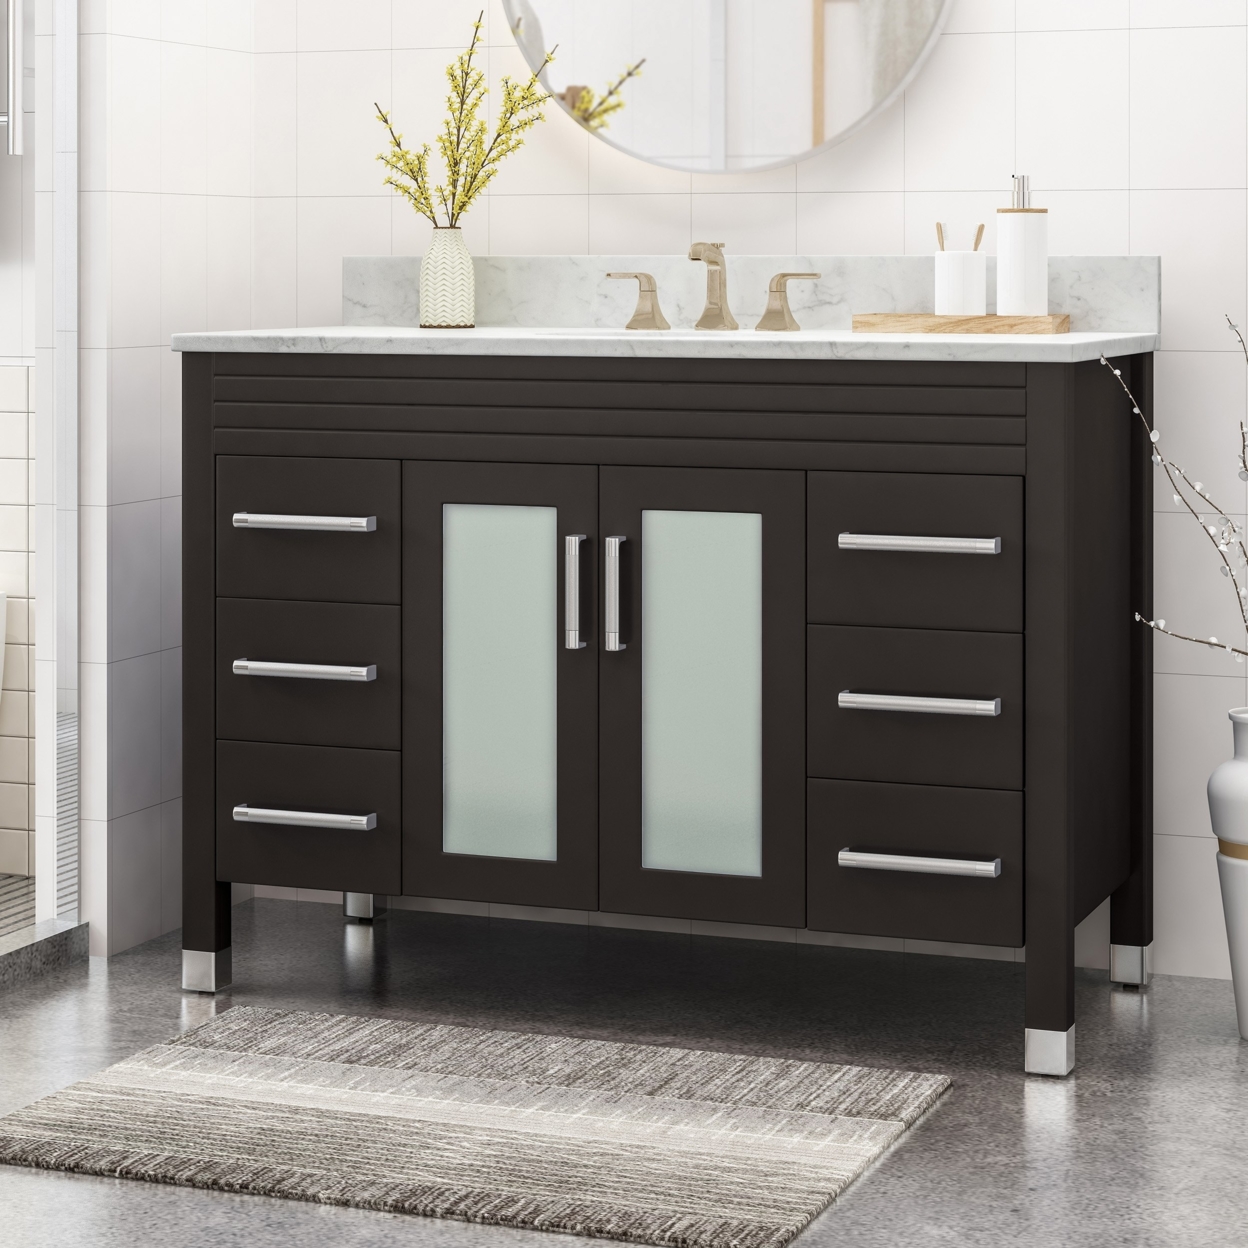 Holdame Contemporary 48 Wood Single Sink Bathroom Vanity With Marble Counter Top With Carrara White Marble - Gray